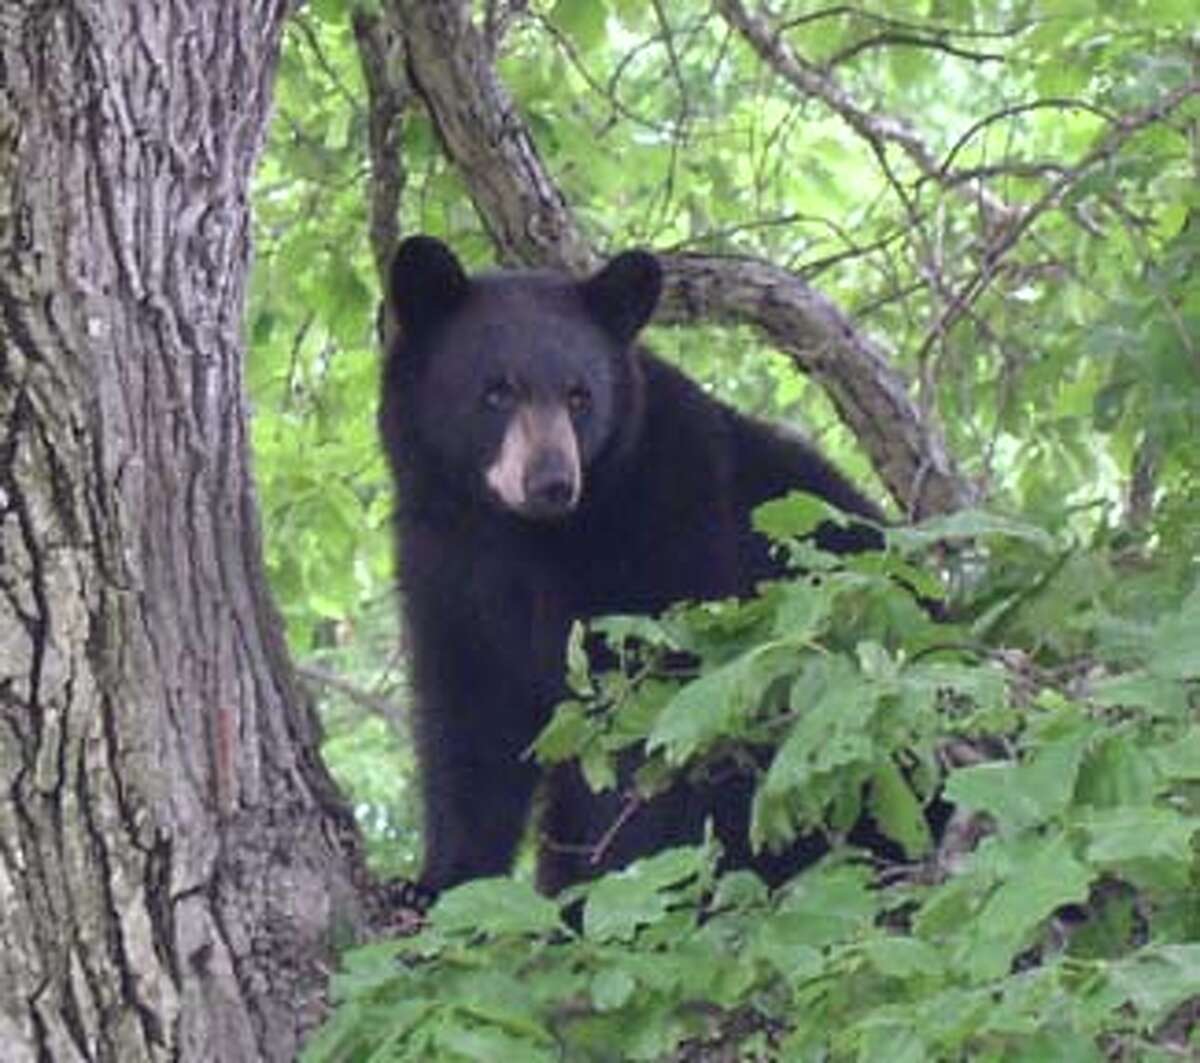 A black bear similar to this one was found shot dead on Roxbury Land Trust property last week.